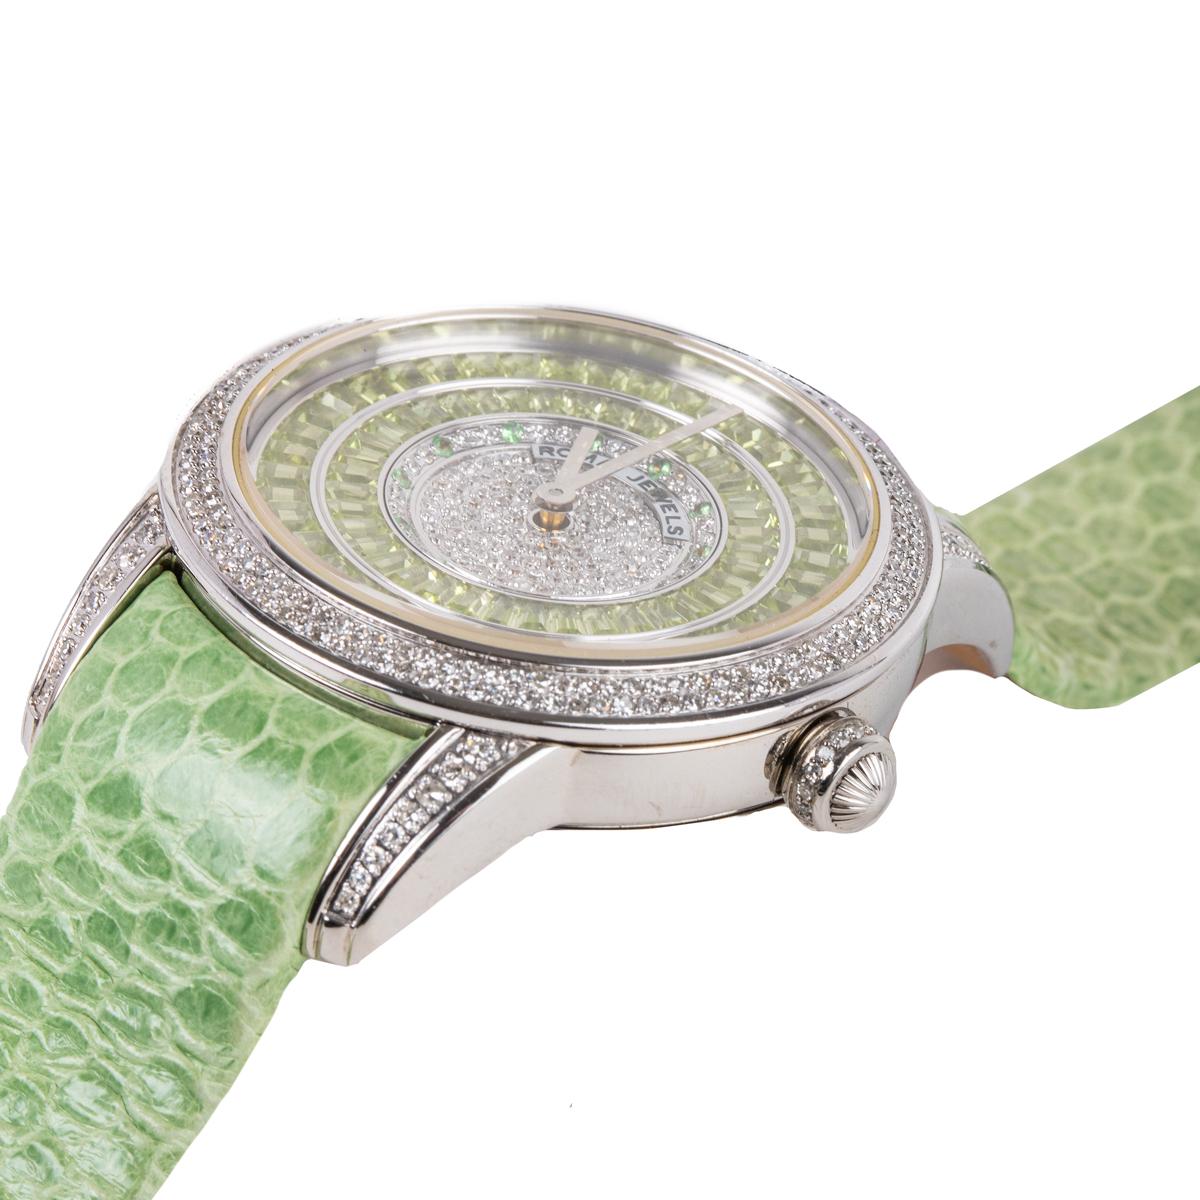 This watch features peridot and diamond stones on the face of the watch. The peridot stones have been baguette-cut and the diamonds are round cut.  This watch features automatic movement and is made with stainless steel and fine leather strap.